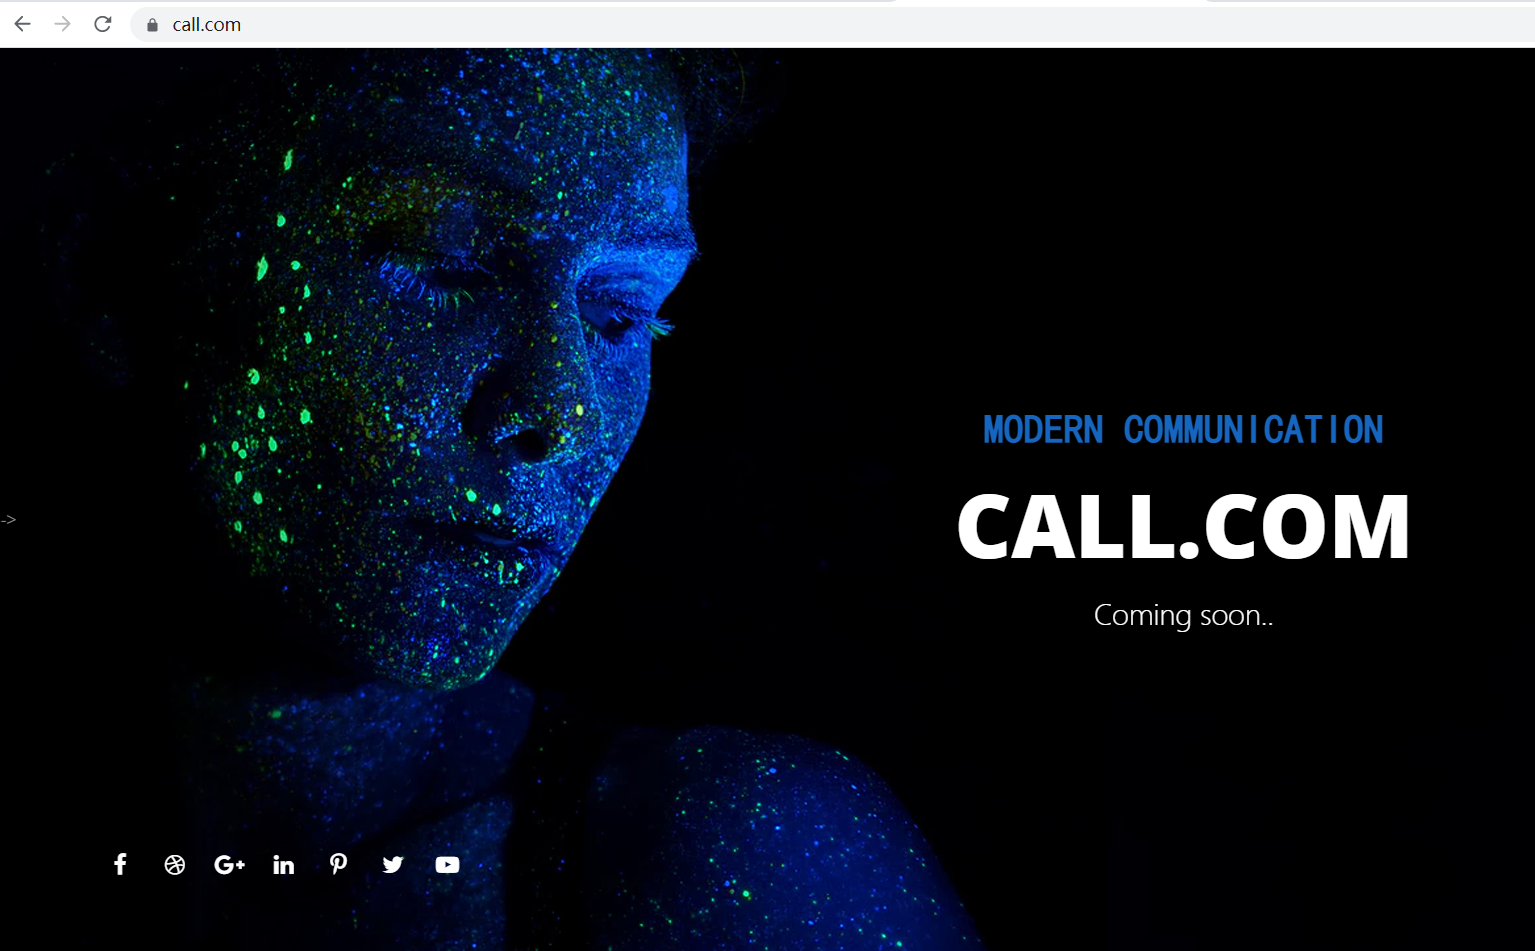 Call.com sells again, this time for $1.6 million